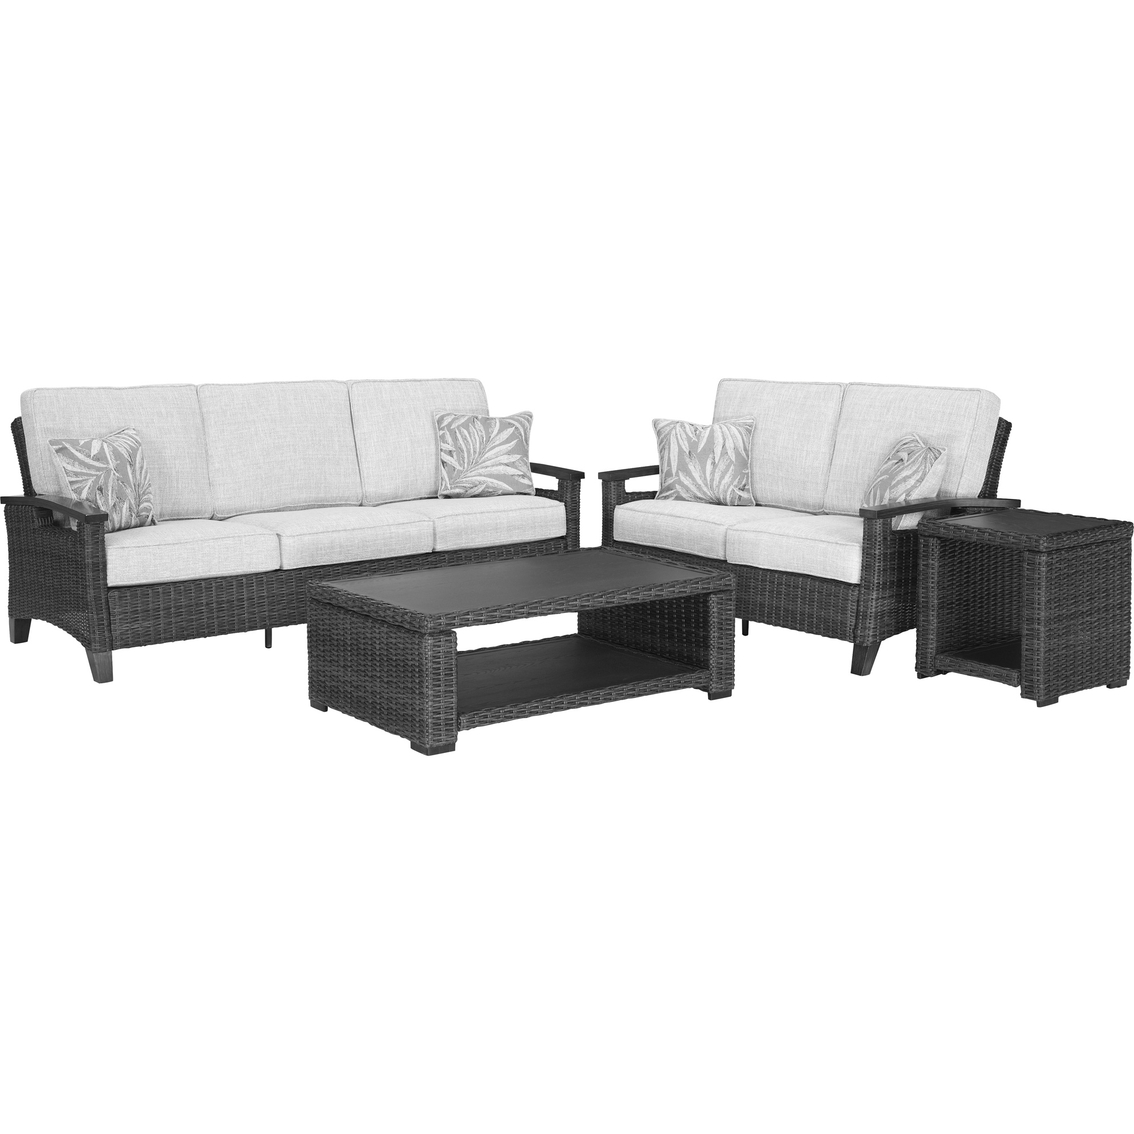 Signature Design by Ashley Paradise Trail 4 pc. Outdoor Seating Set - Image 1 of 10